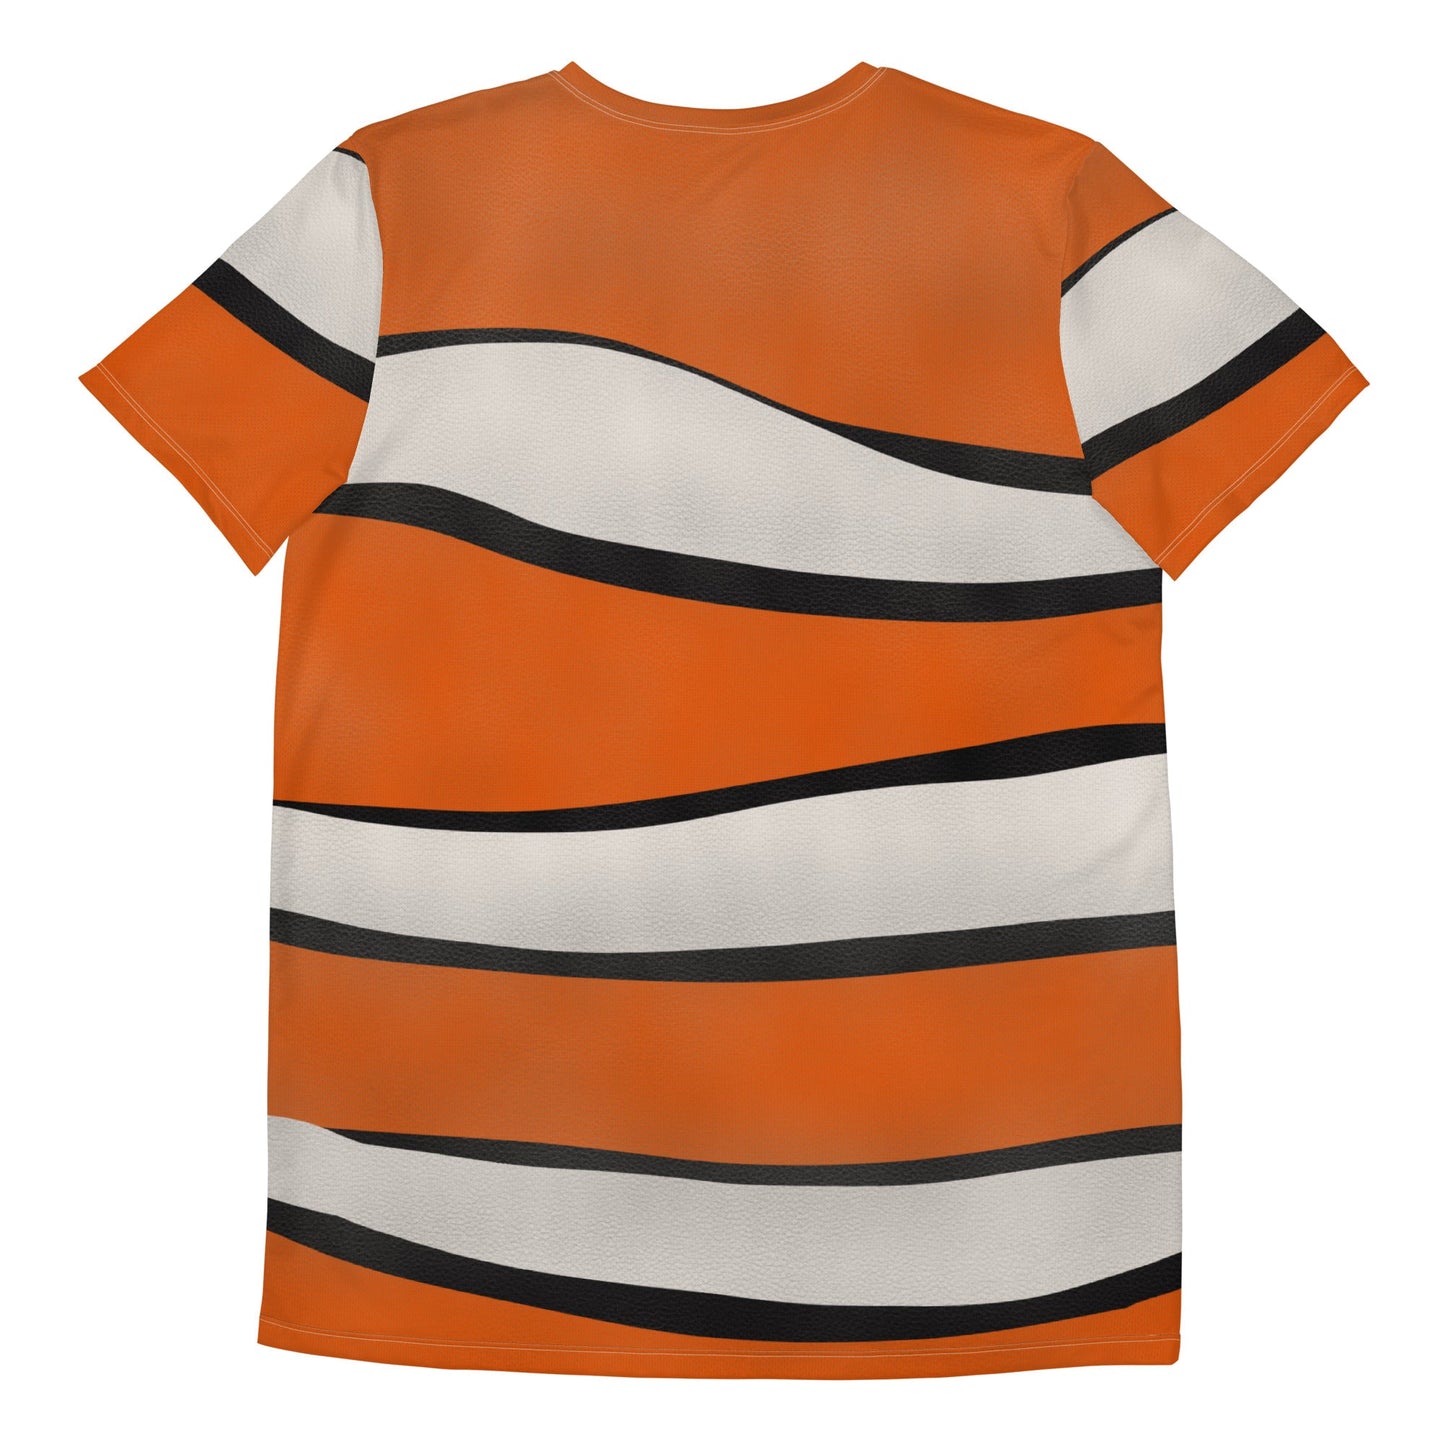 The Nemo Men's Athletic T-shirt adult nemo outfitdisney adultLittle Lady Shay Boutique